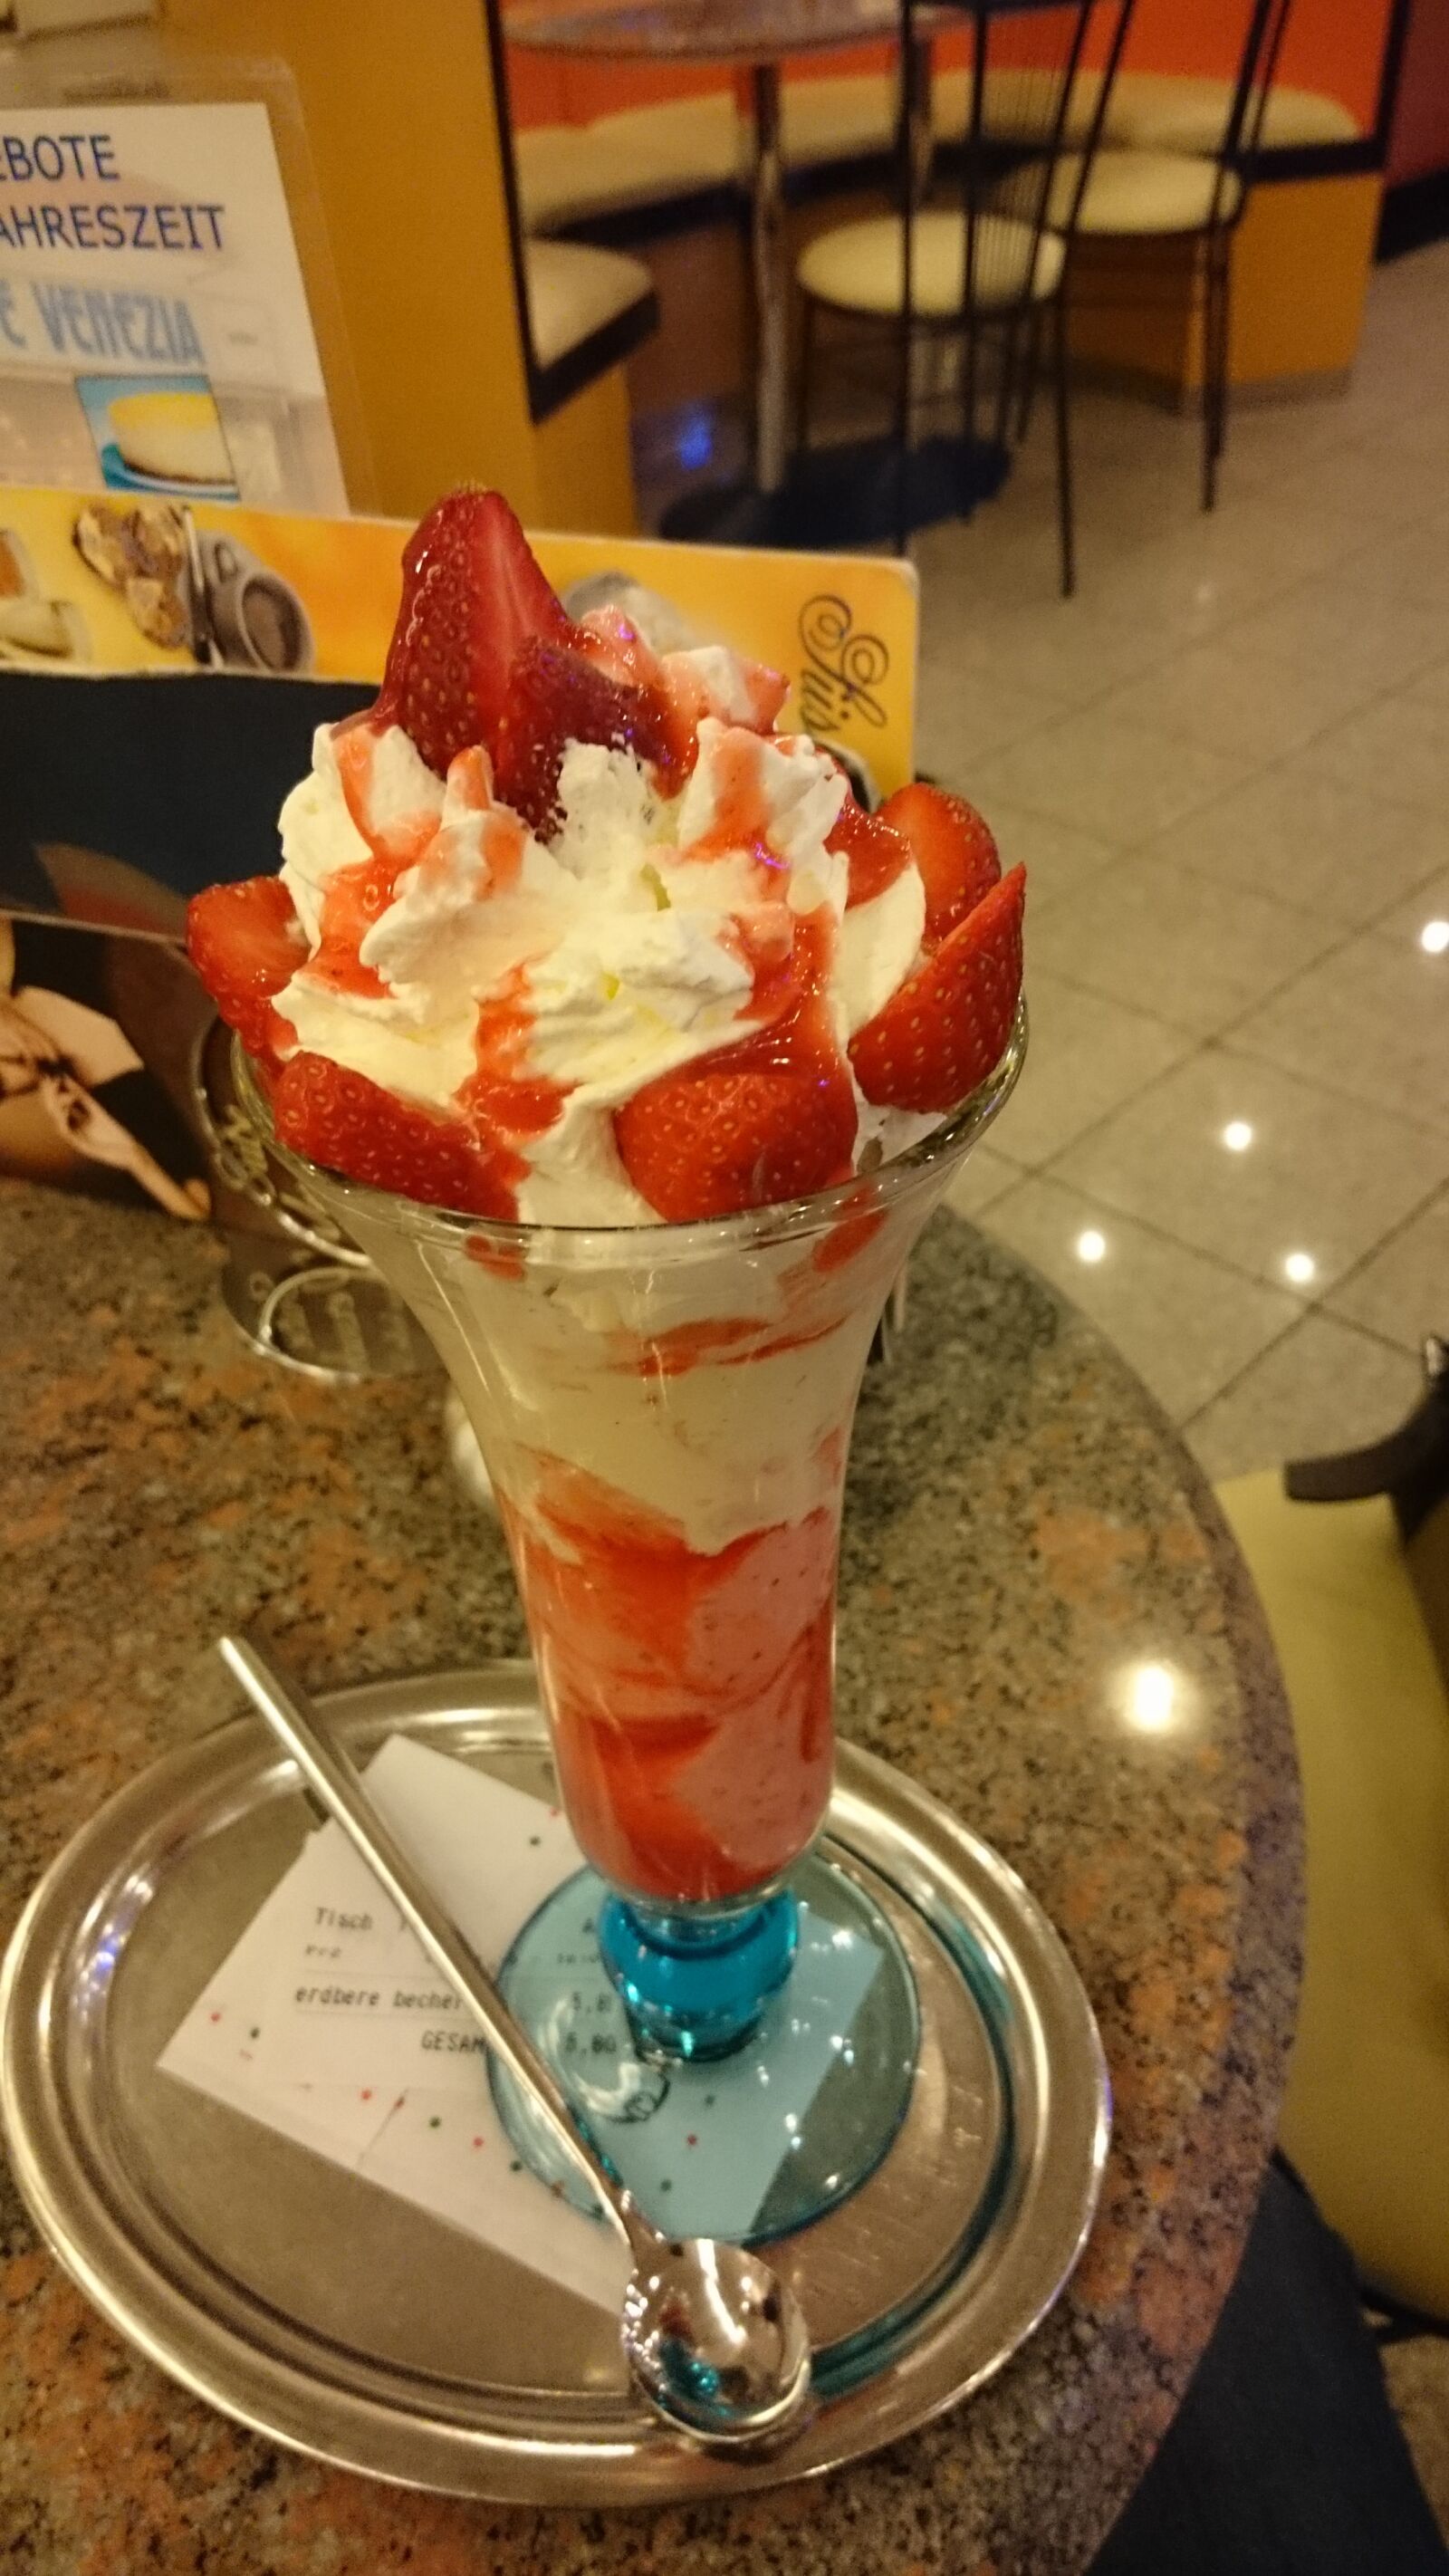 Sony Xperia Z3 Compact sample photo. Ice cream, eat, summer photography